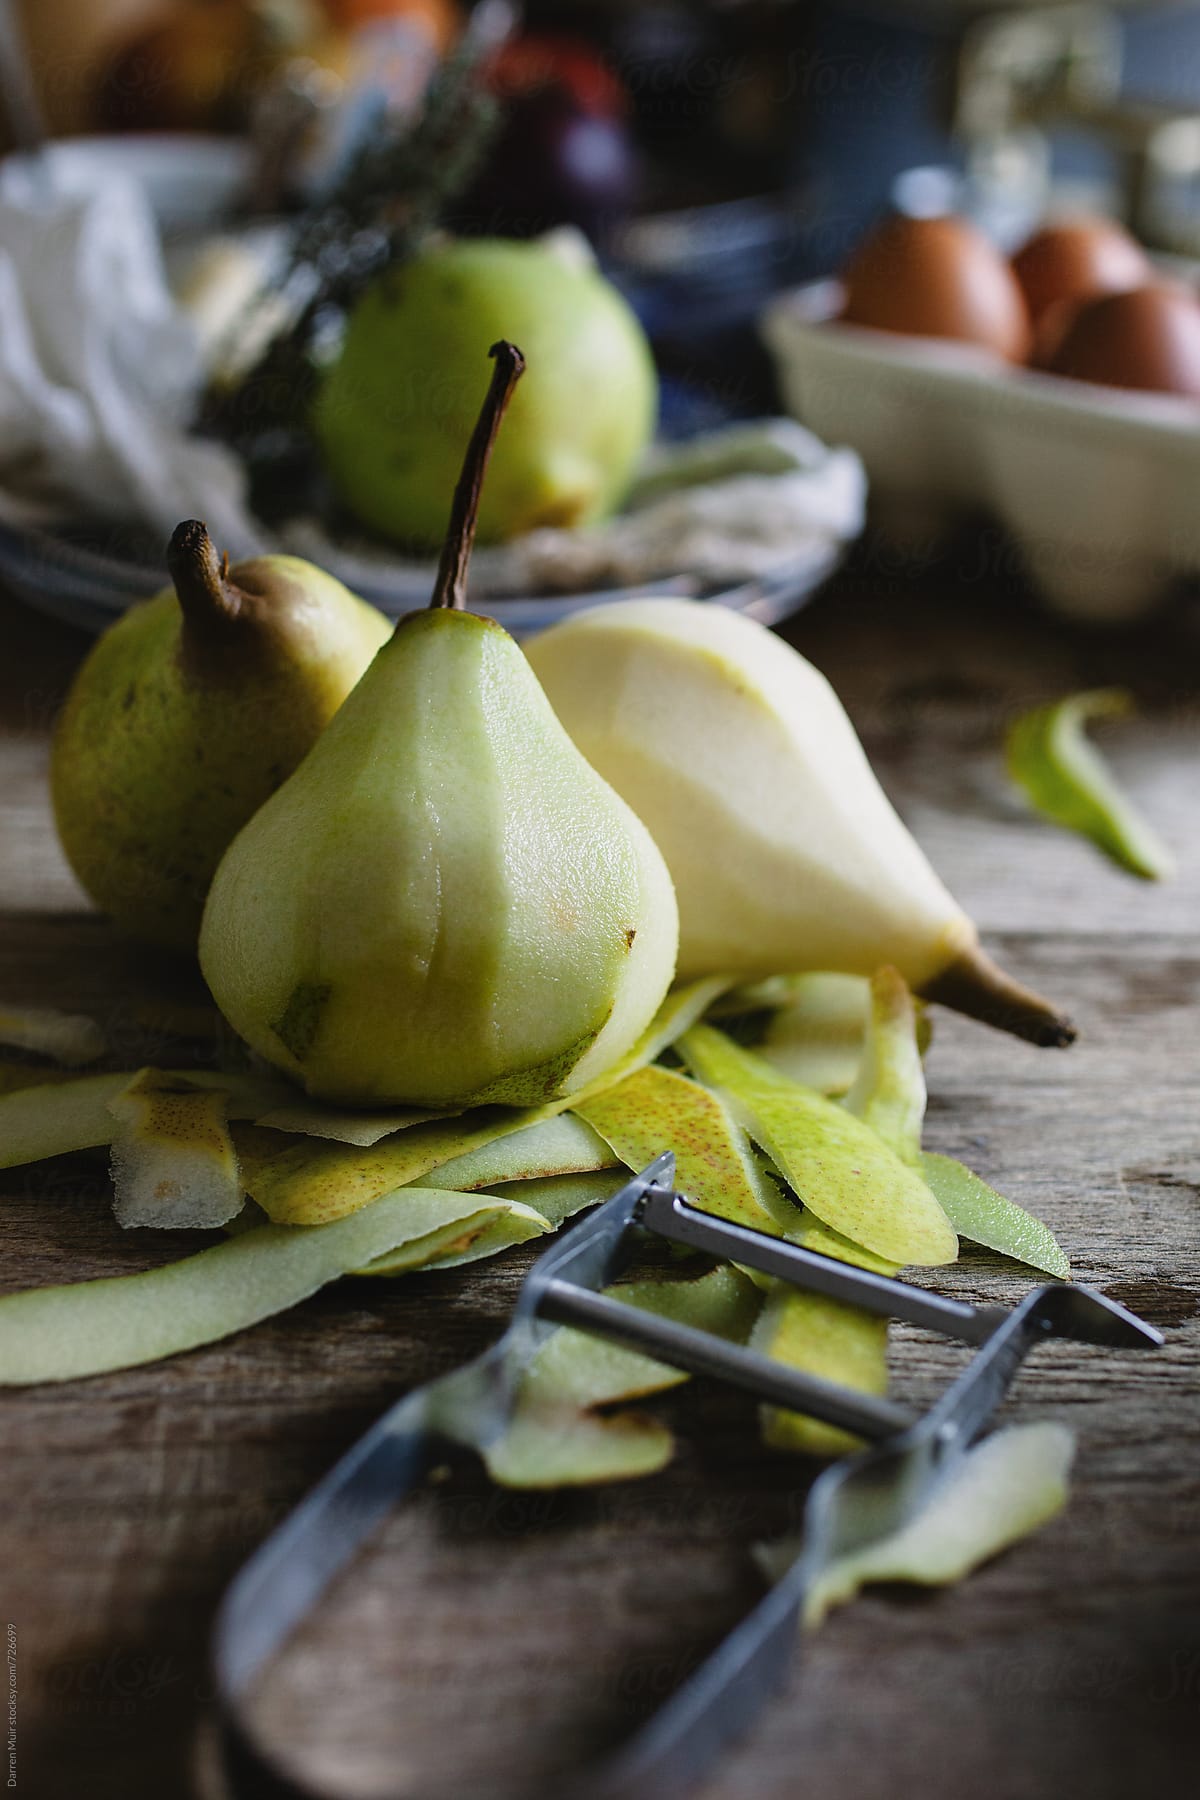 Peeling pears for use in a dessert.